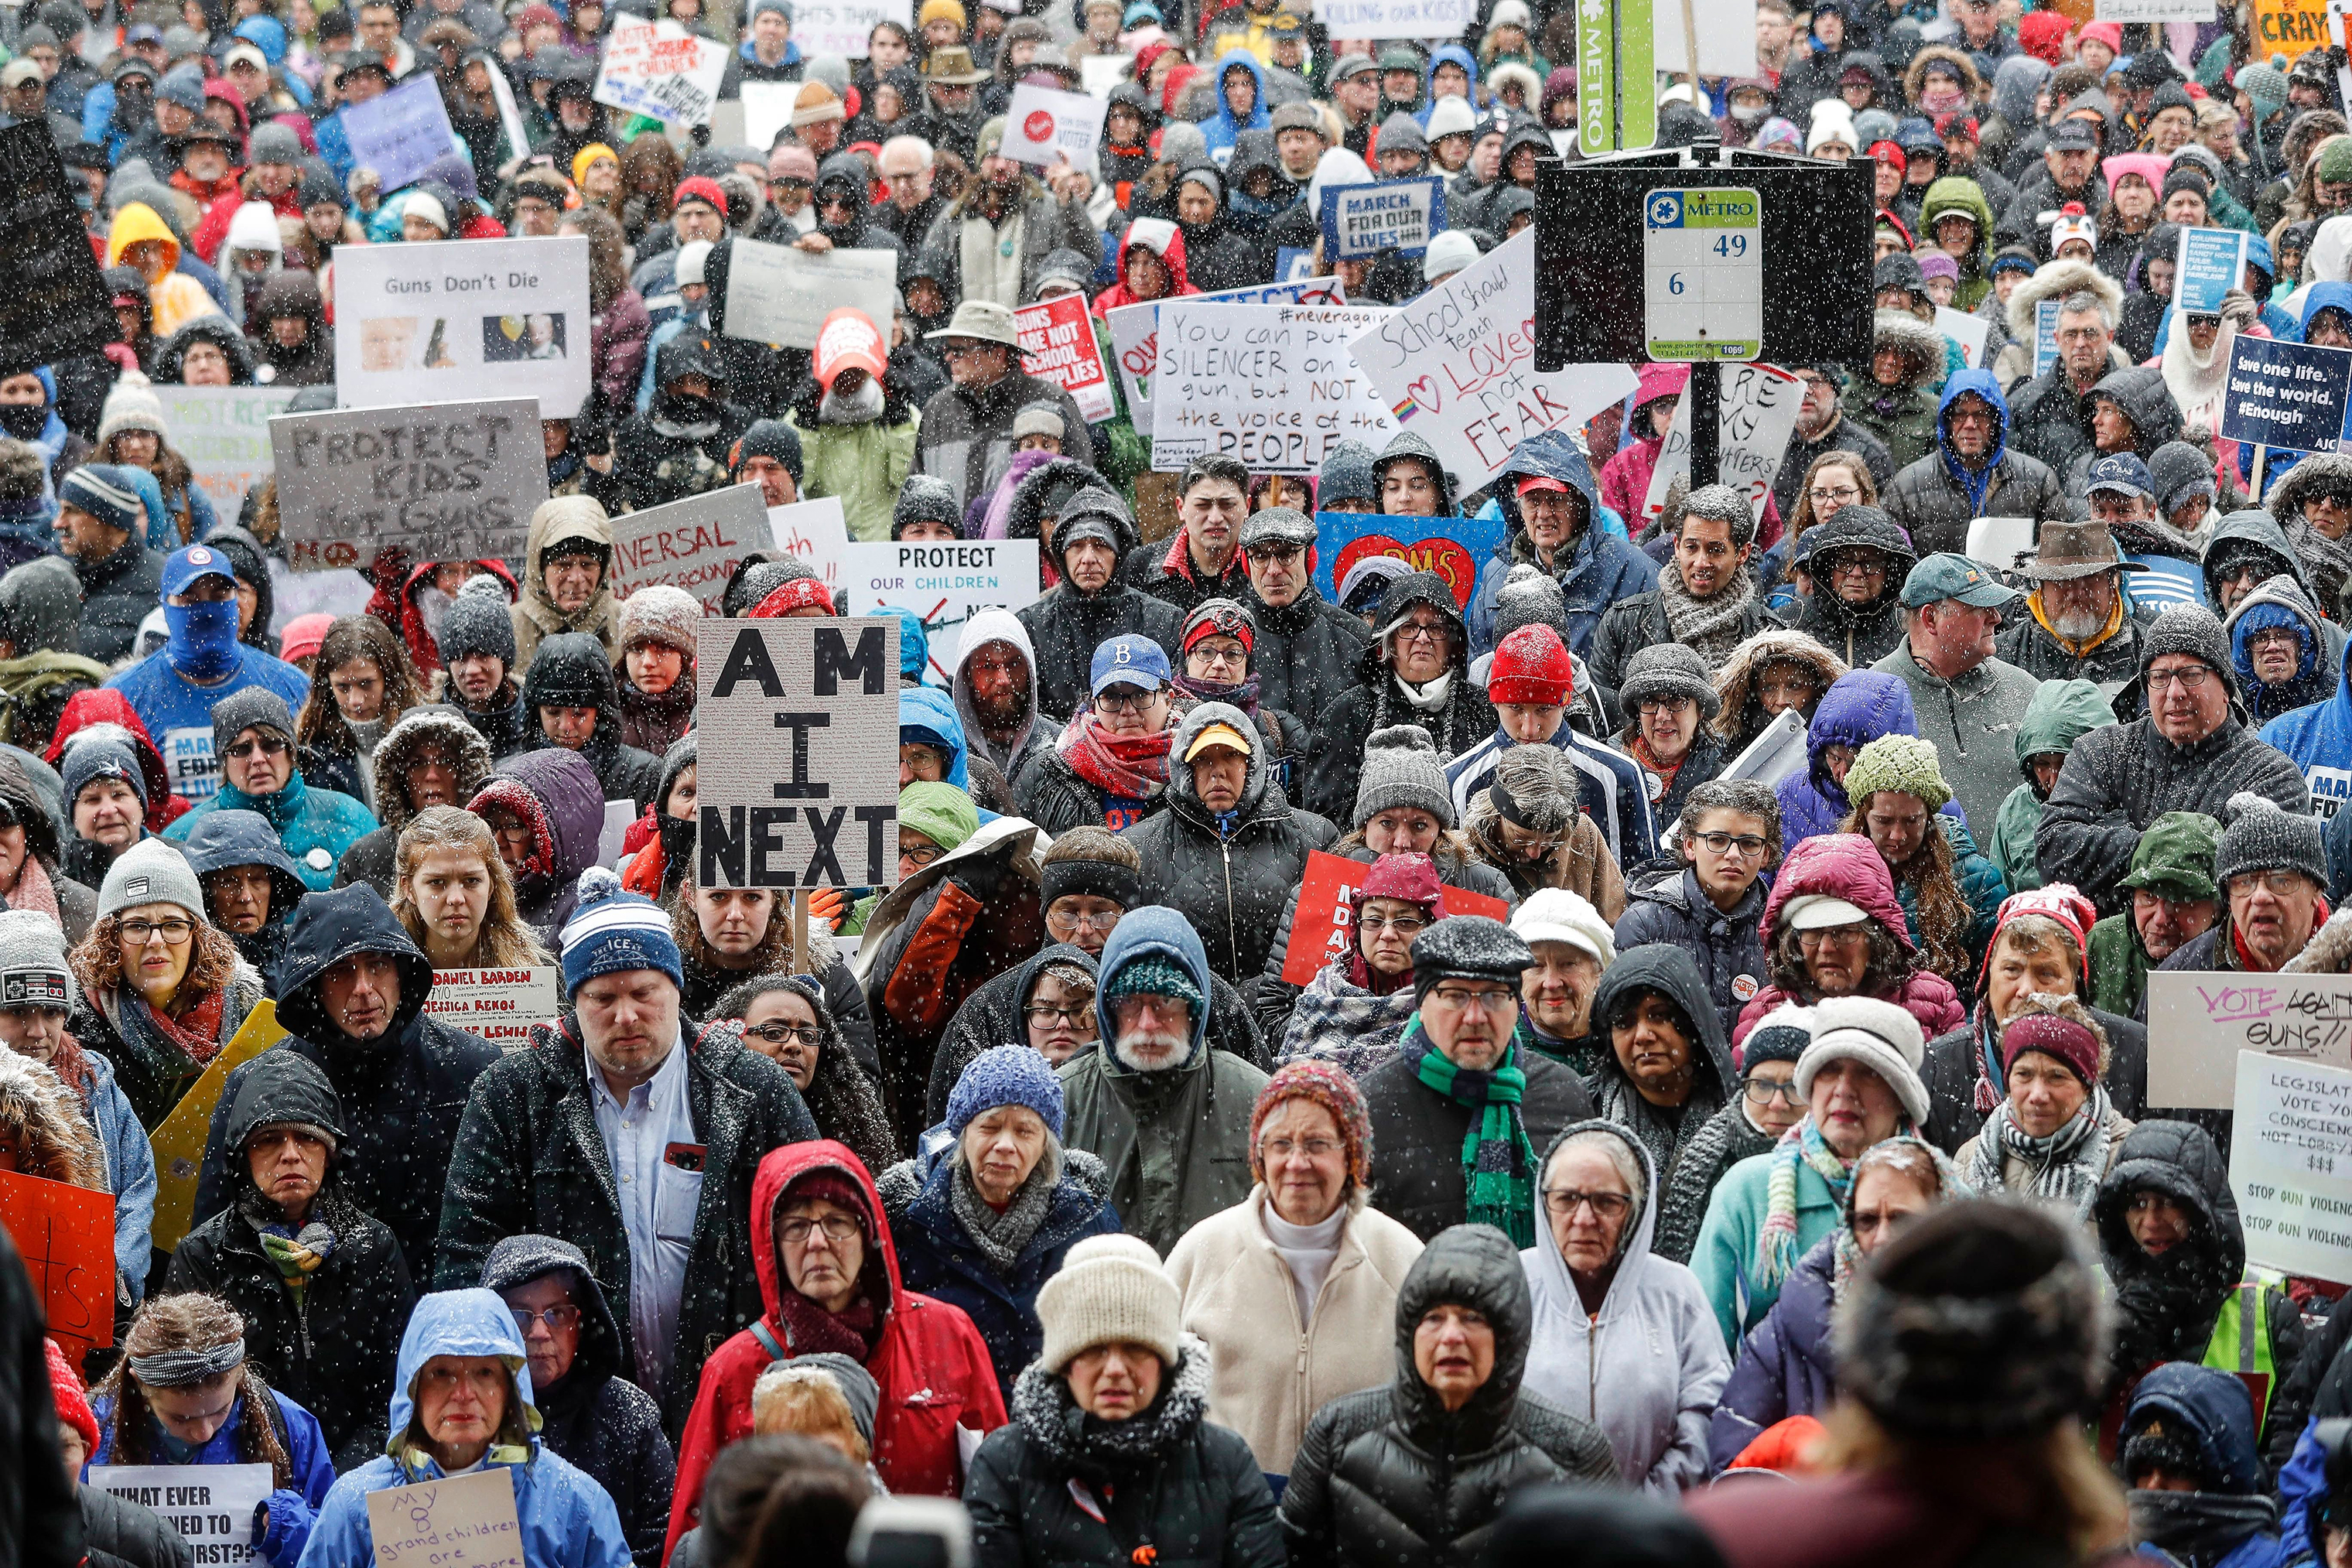 Demonstrators gather outside city hall during the March for Our Lives protest for gun legislation and school safety. (John Minchillo—AP/Shutterstock)